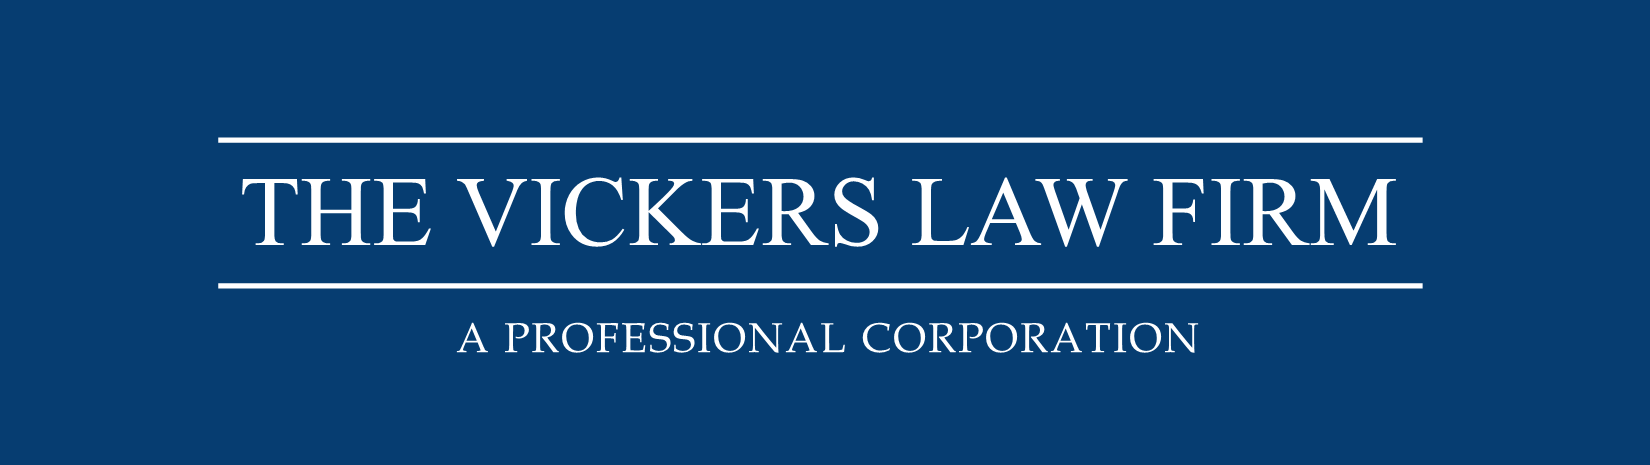 The Vickers Law Firm